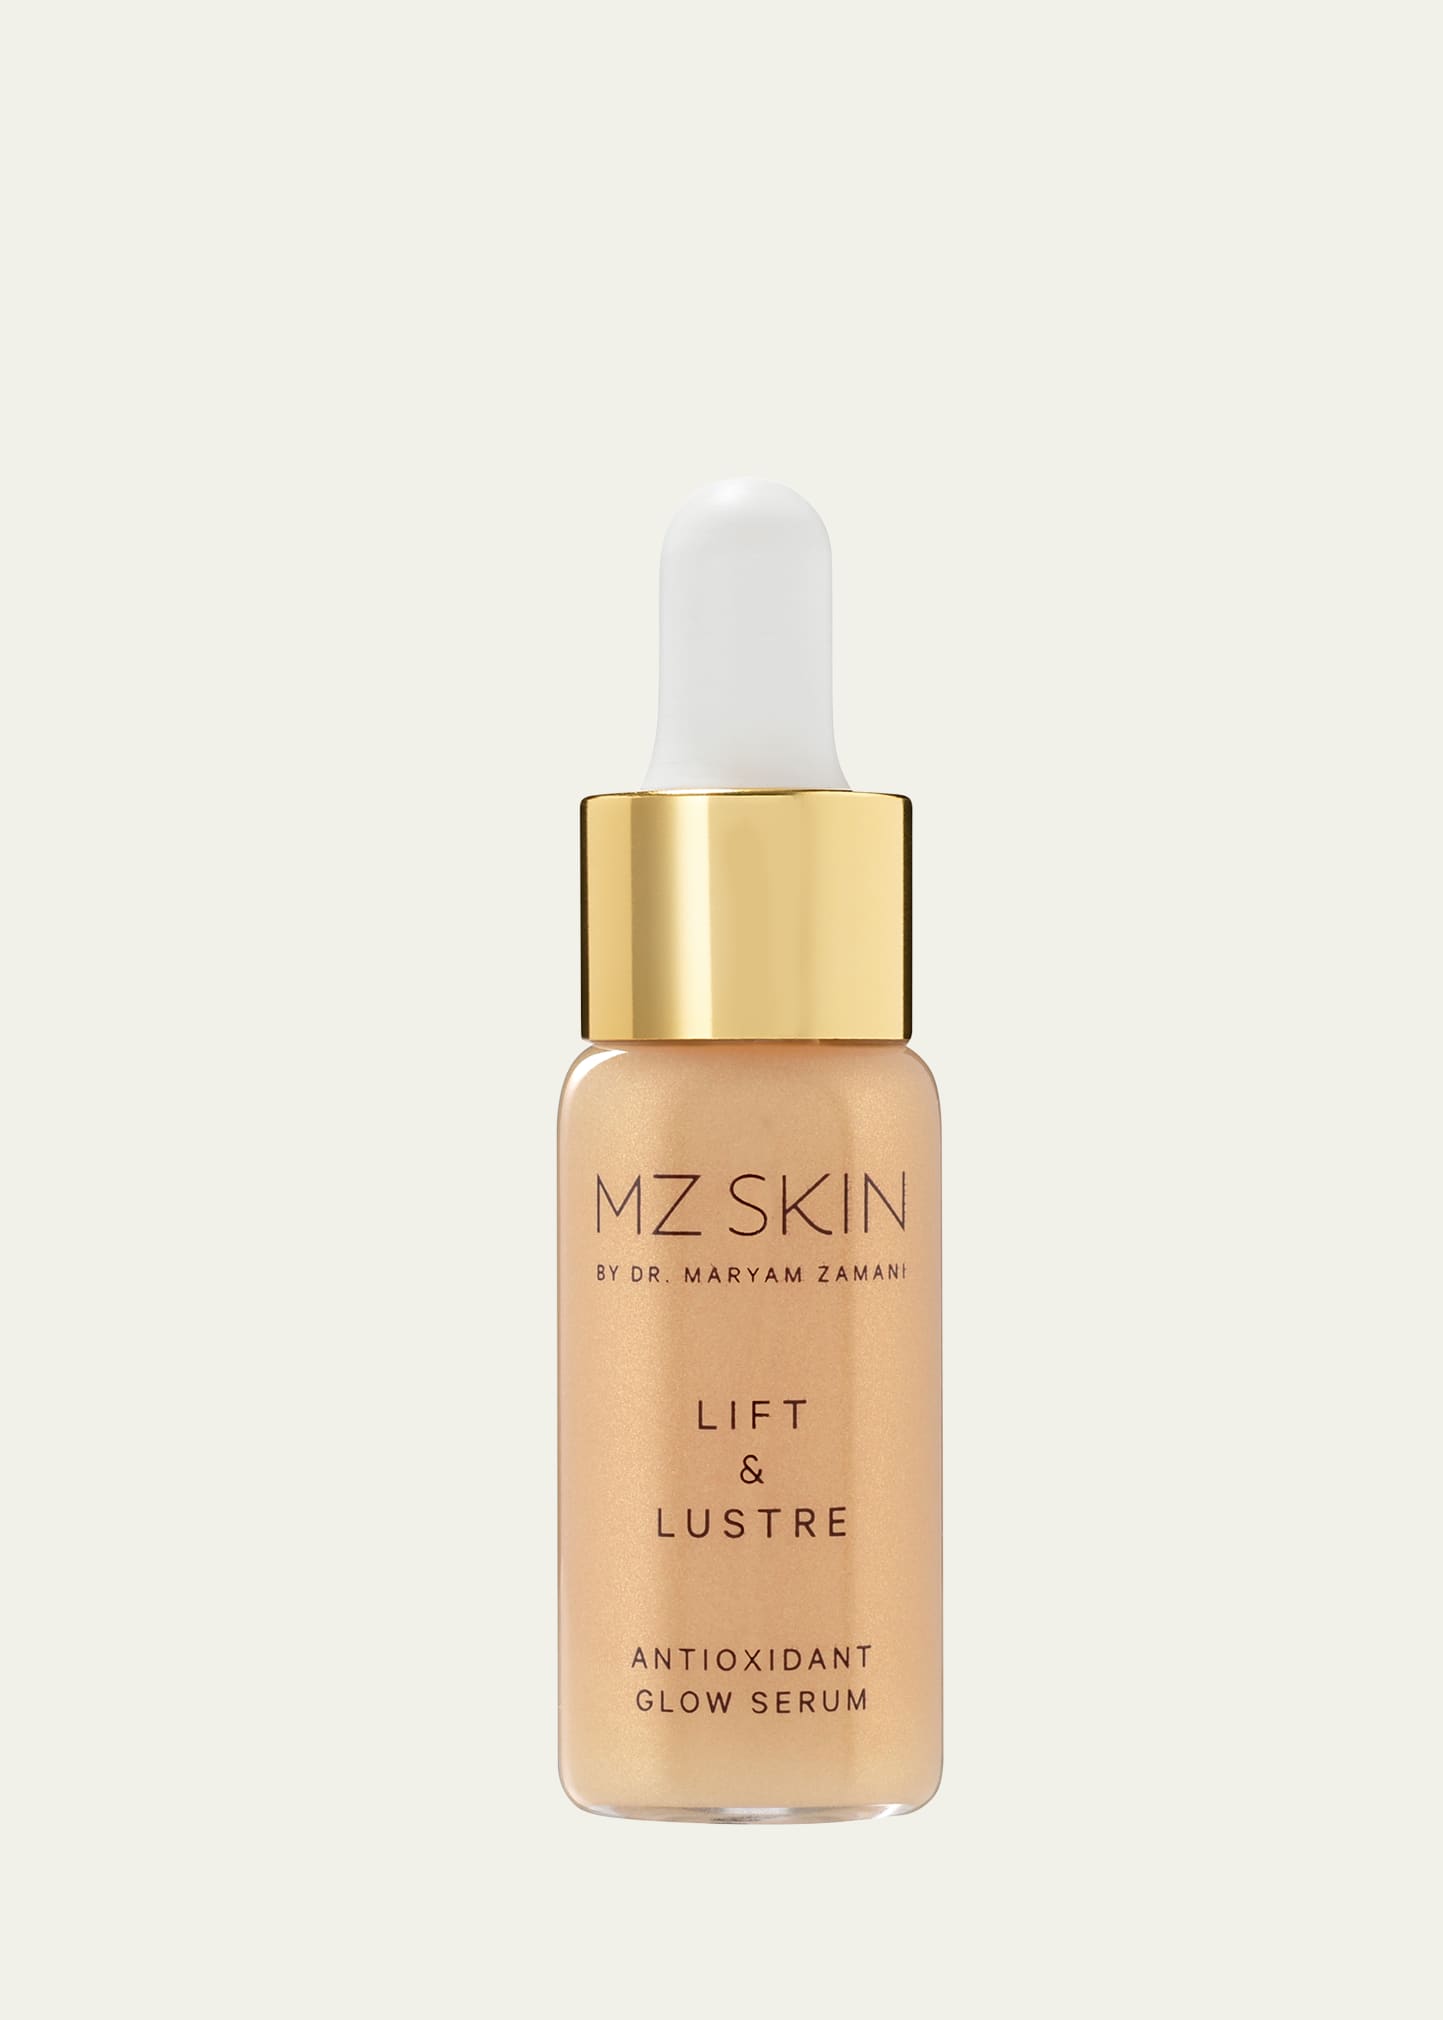 Lift & Lustre Golden Elixir, Yours with any $75 MZ Skin Order